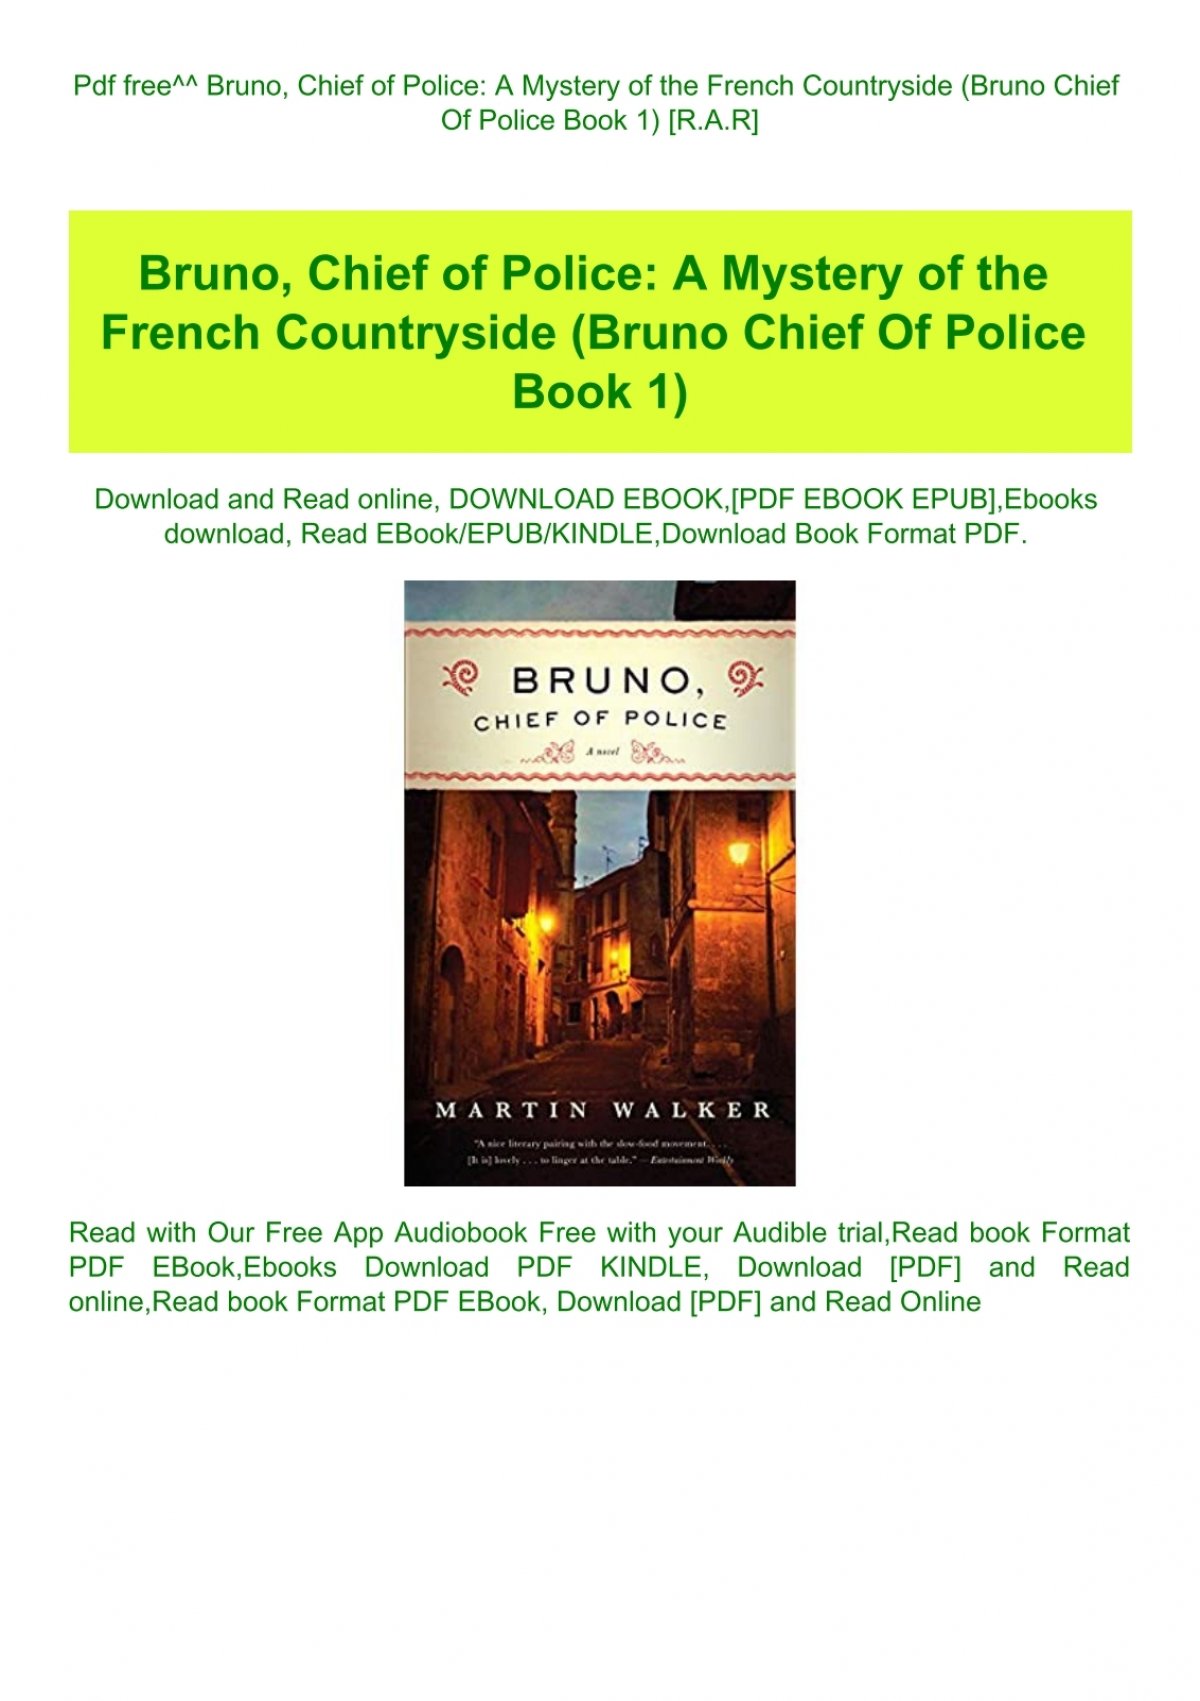 bruno chief of police tours